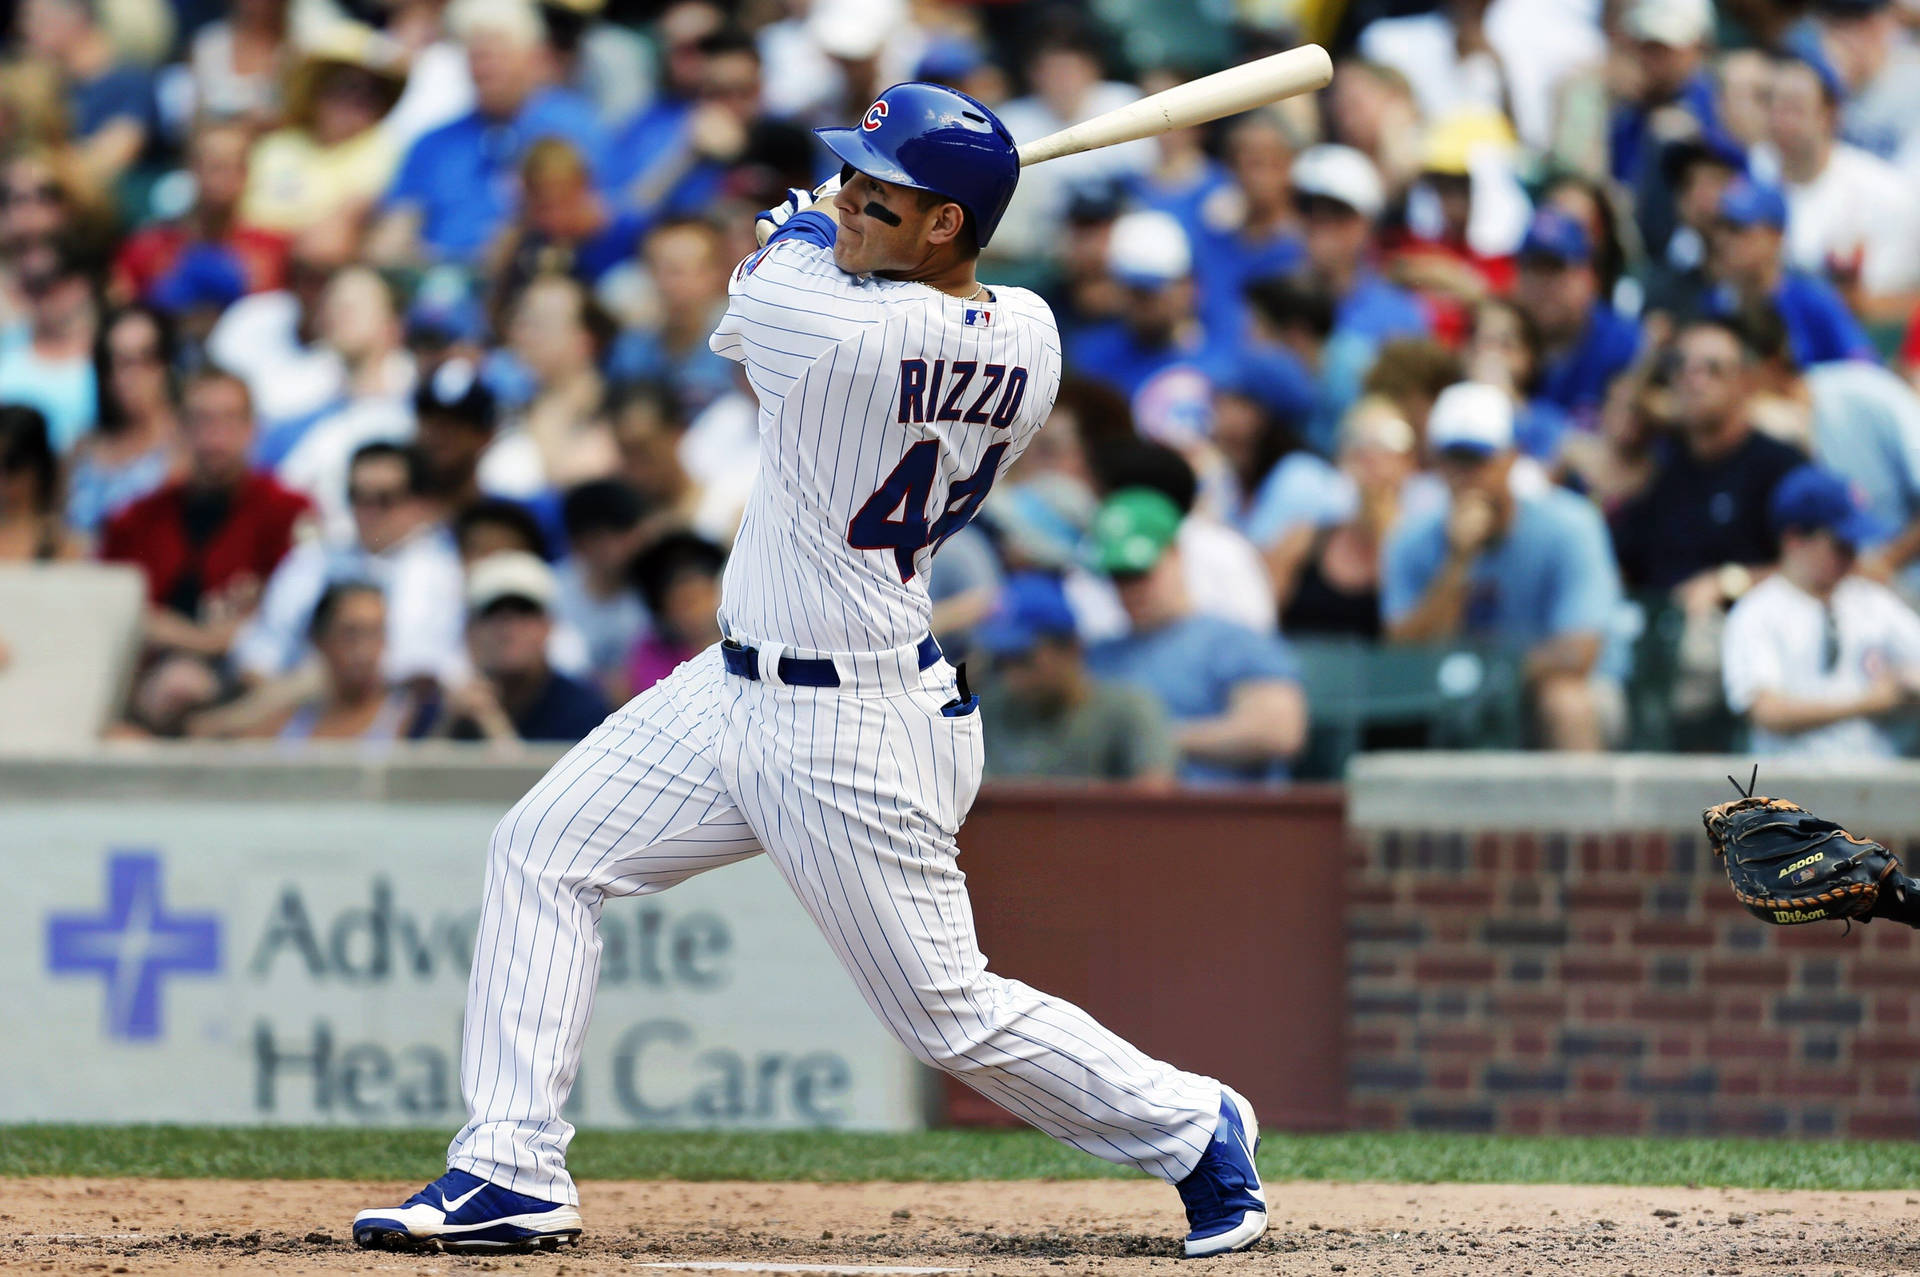 Anthony Rizzo Wallpaper, Anthony Rizzo Chicago Cubs Wallpap…